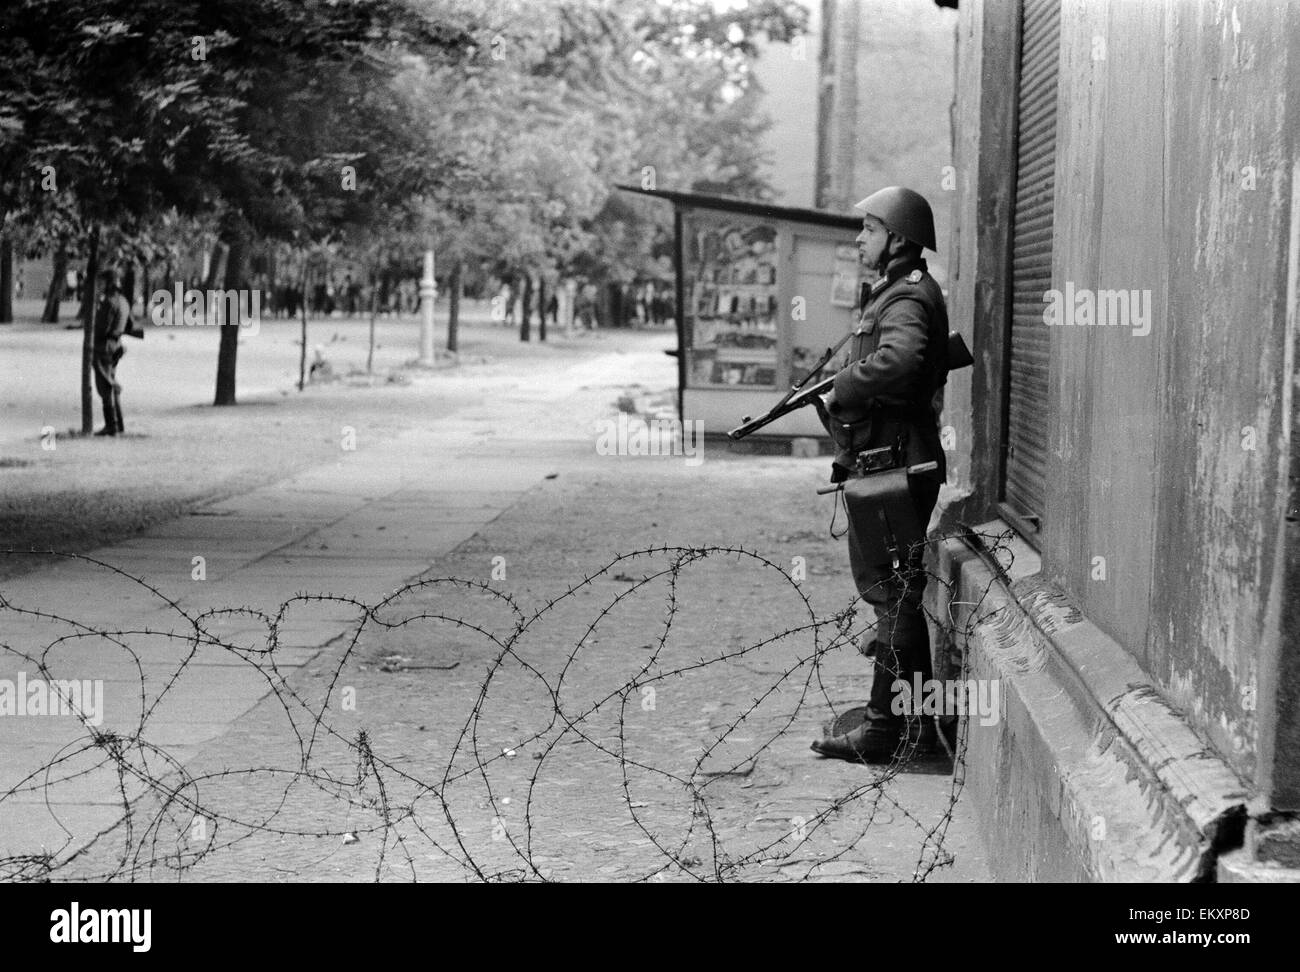 East-West Berlin border. 13th August 1961. Stock Photo